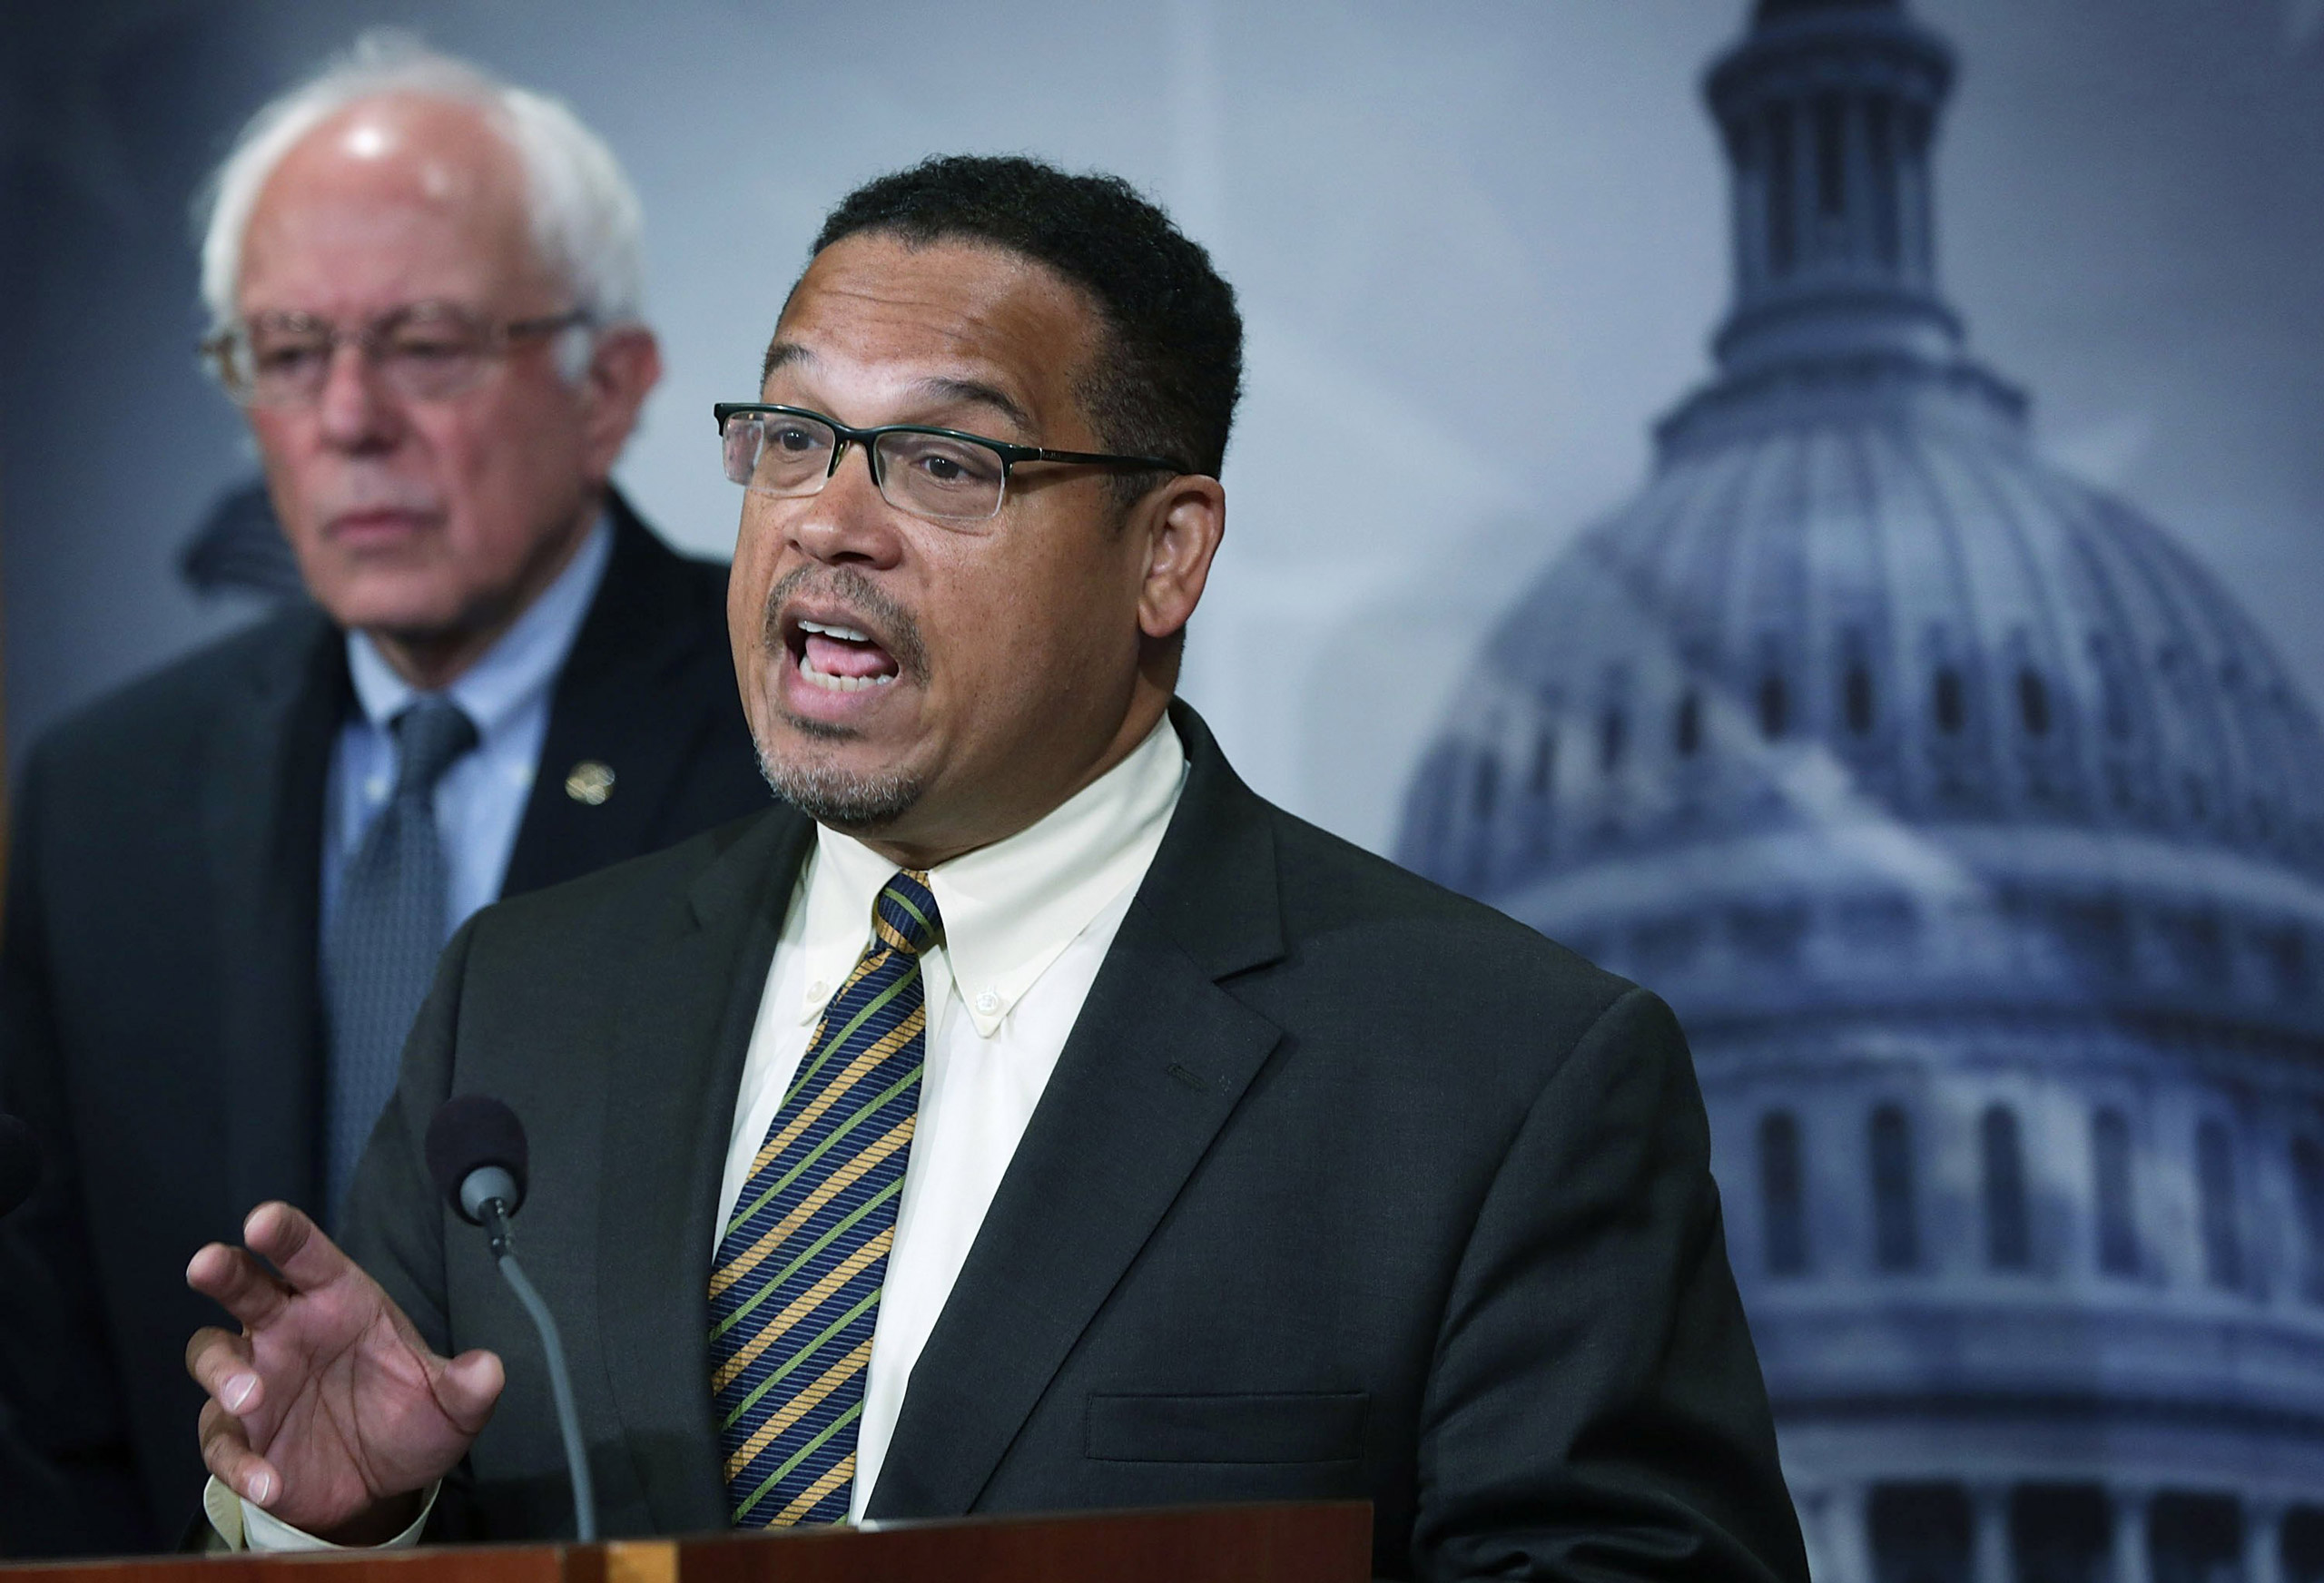 WASHINGTON, DC - SEPTEMBER 17:  U.S. Sen. Bernie Sanders (I-VT) (L) and Rep. Keith Ellison (D-MN) (R) speak to members of the media during a news conference about private prisons September 17, 2015 on Capitol Hill in Washington, DC. The legislators announced that they will introduce bills to ban private prisons.  (Photo by Alex Wong/Getty Images)